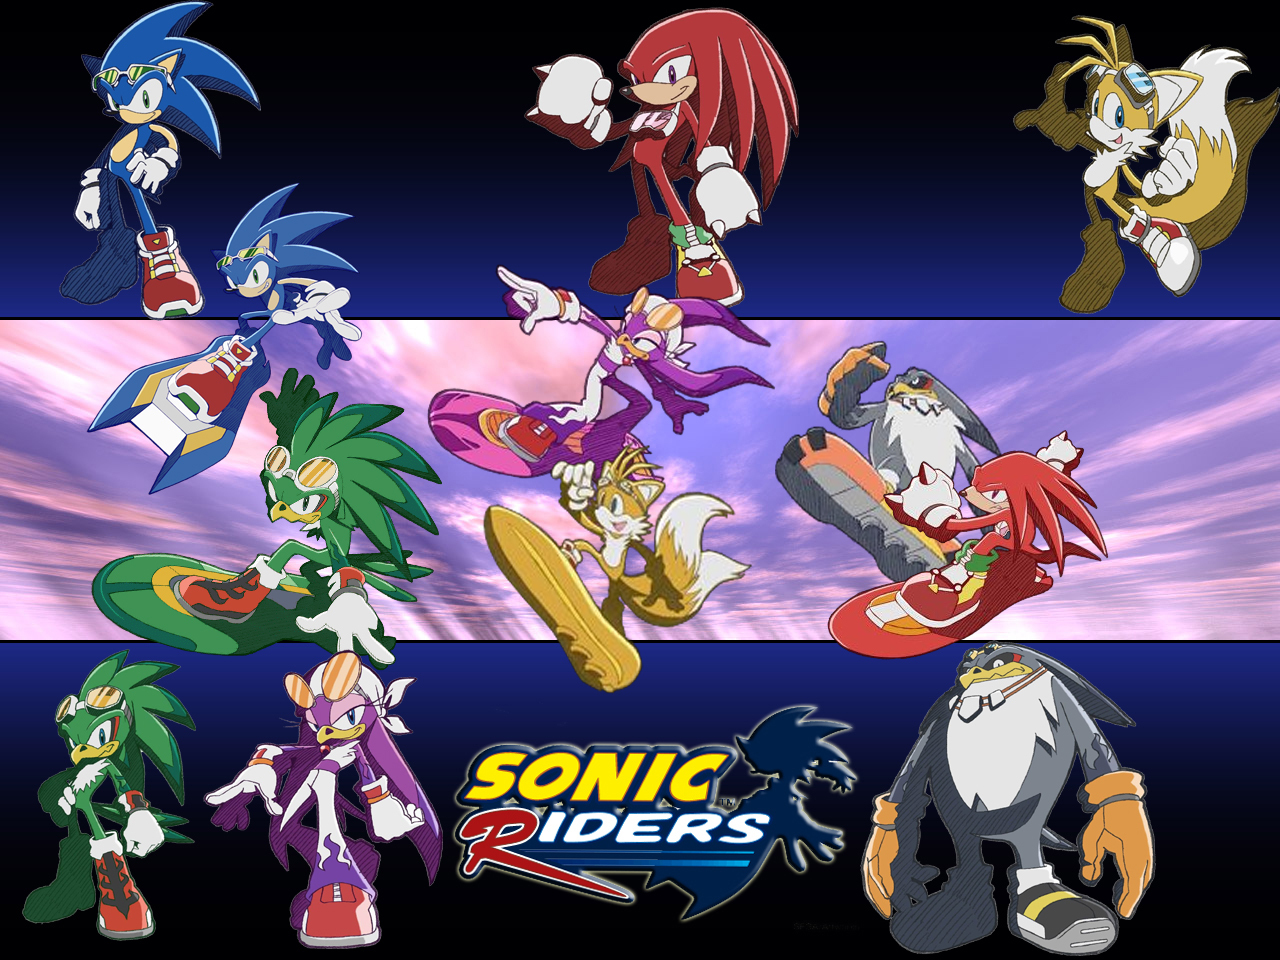 http://images2.fanpop.com/images/photos/2700000/sonic-riders-sonic-rider-2748257-1280-960.jpg